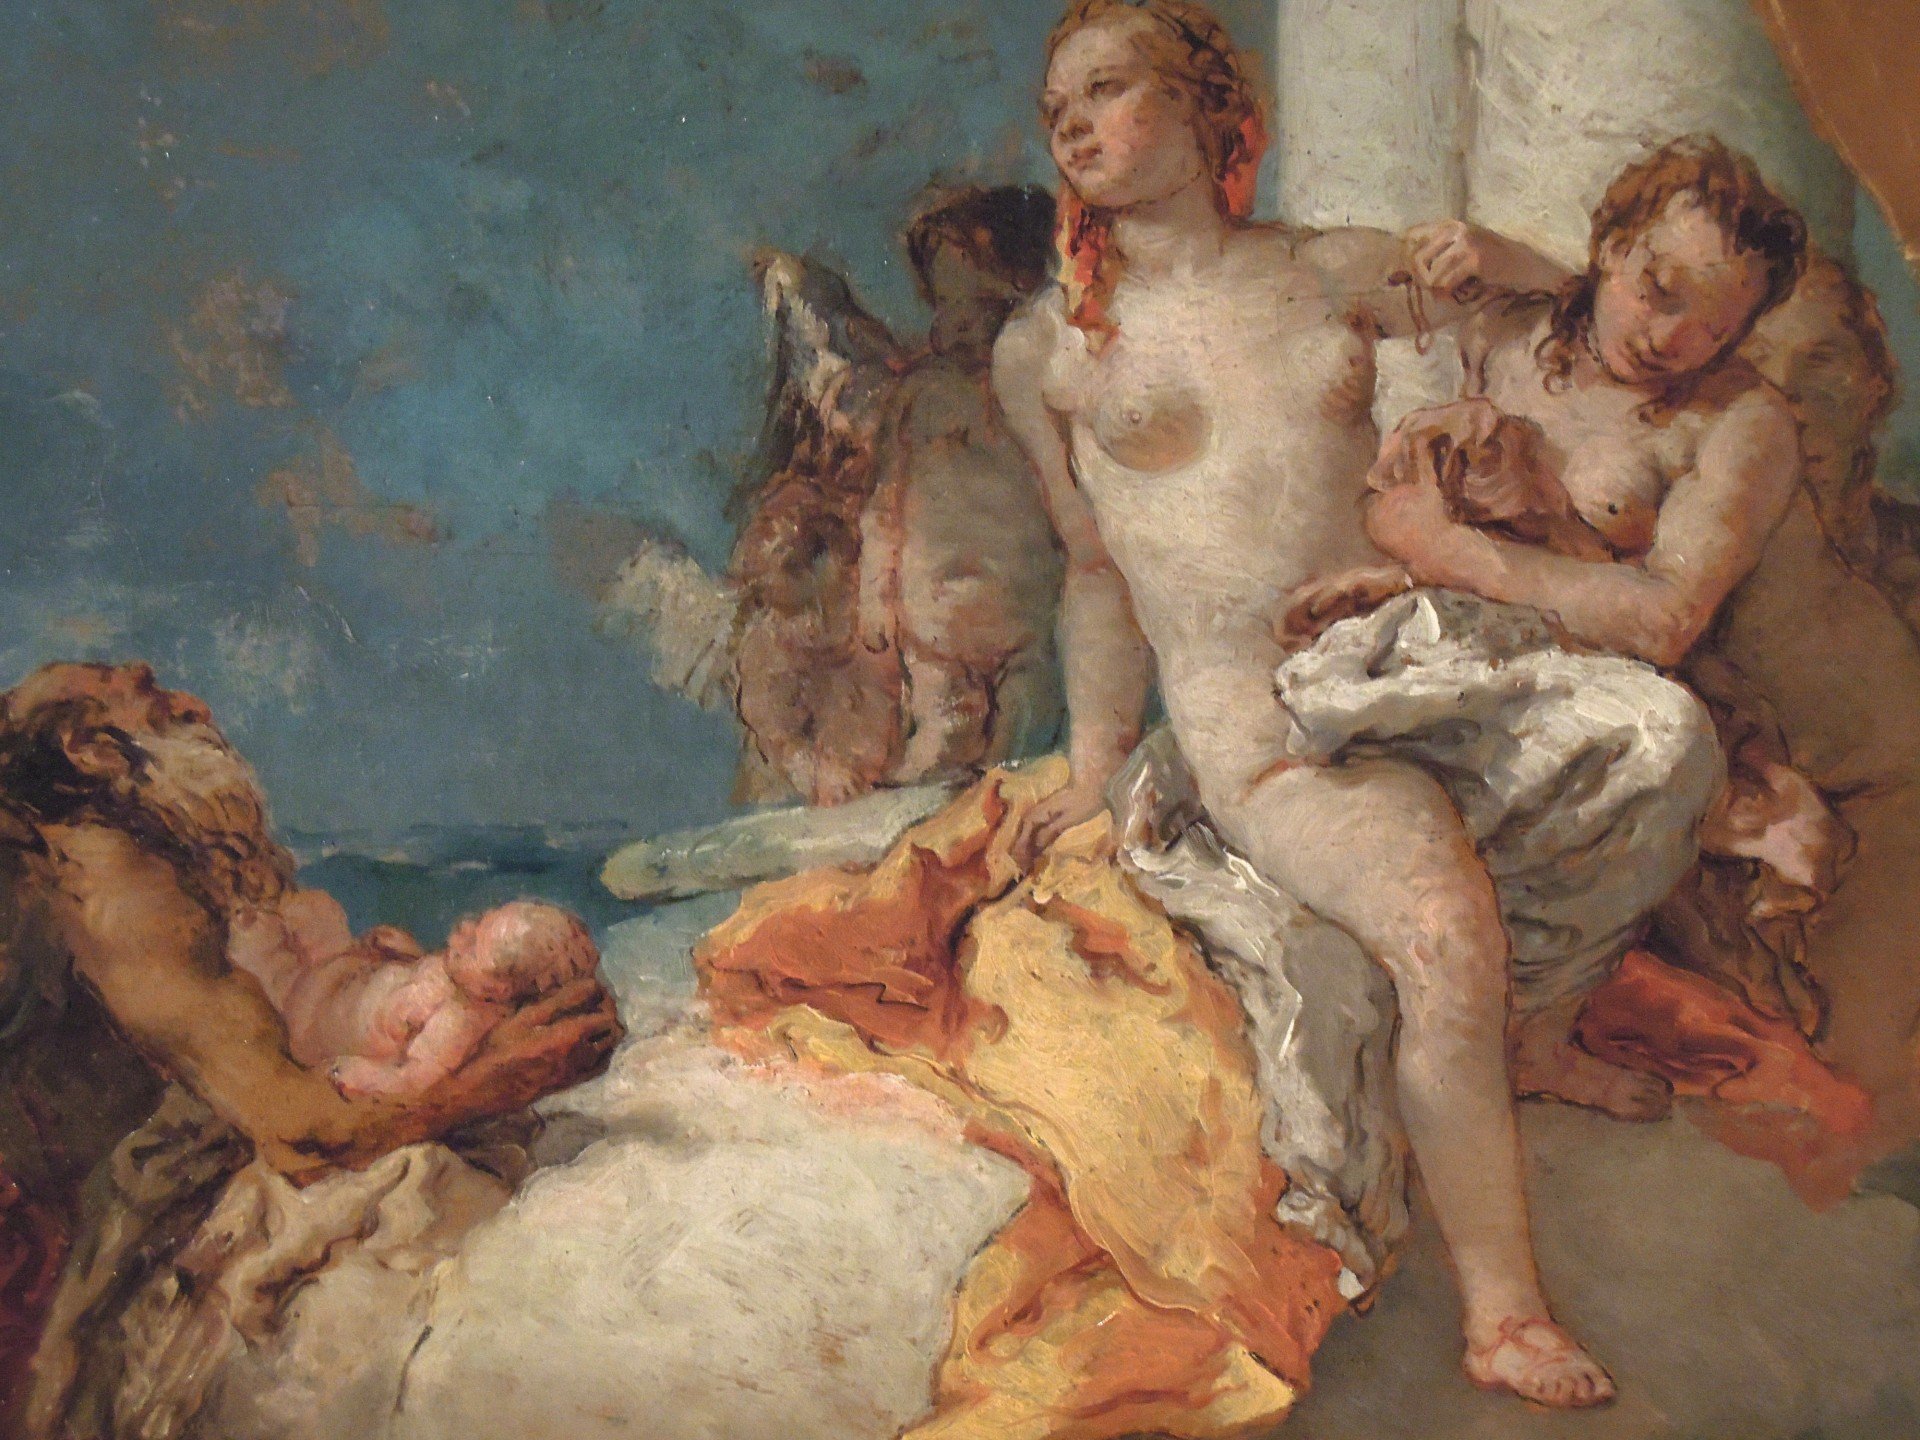 Giambattista Tiepolo, Allegory of the birth of Francis I d'Habsbourg, 1768-1770.